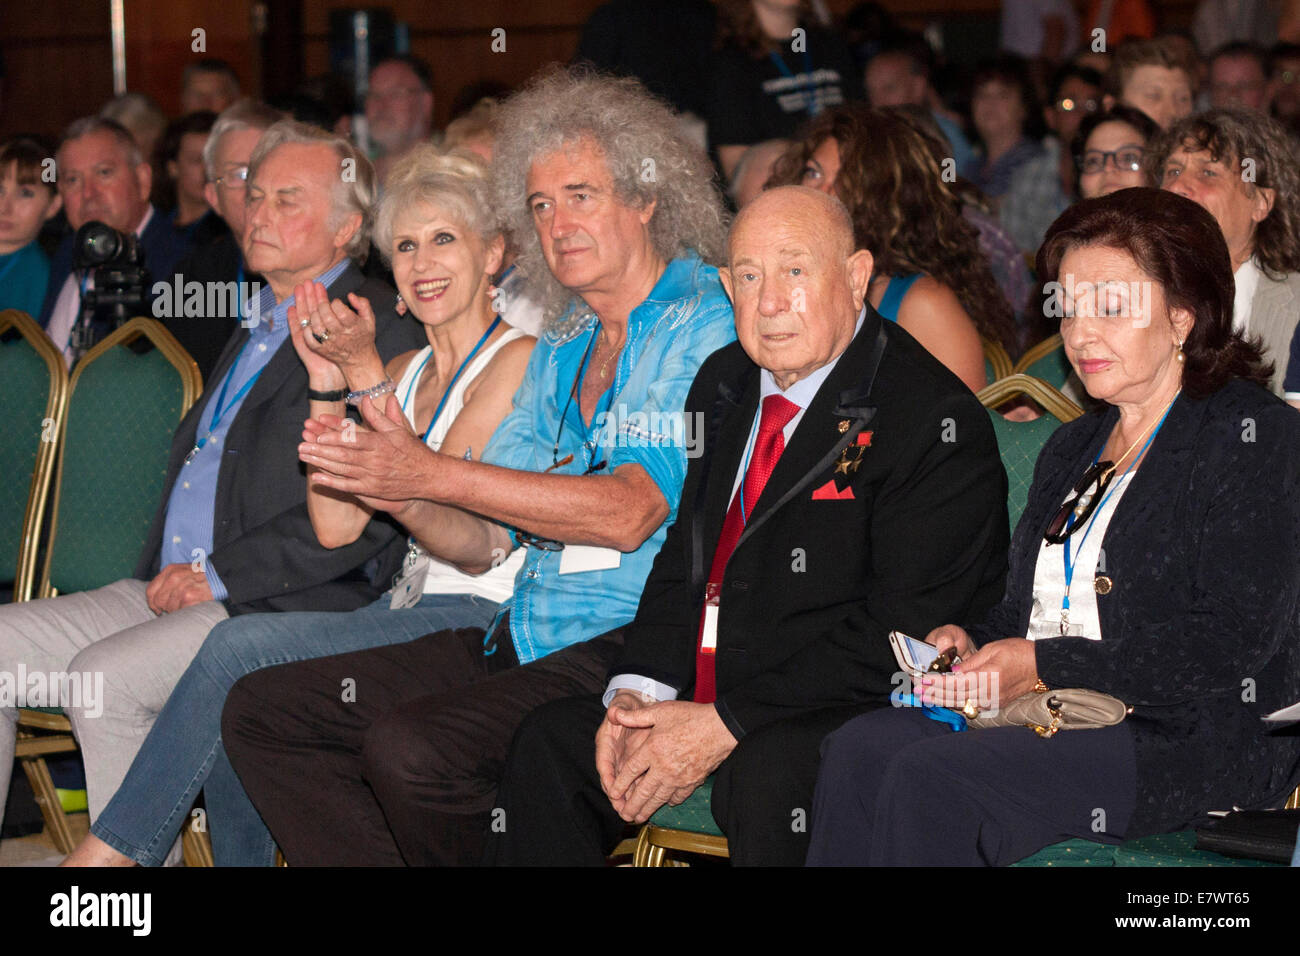 Ethologist Richard Dawkins, actress Anita Dobson, musician Brian May of Queen and Cosmonaut Alexey Leonov/Alexei Archipowitsch Leonow and wife Oksana Leonova attending the second editon of the Starmus Festival at the Abama Golf & Spa Resort in Tenerife, Canary Islands on September 22, 2014/picture alliance Stock Photo